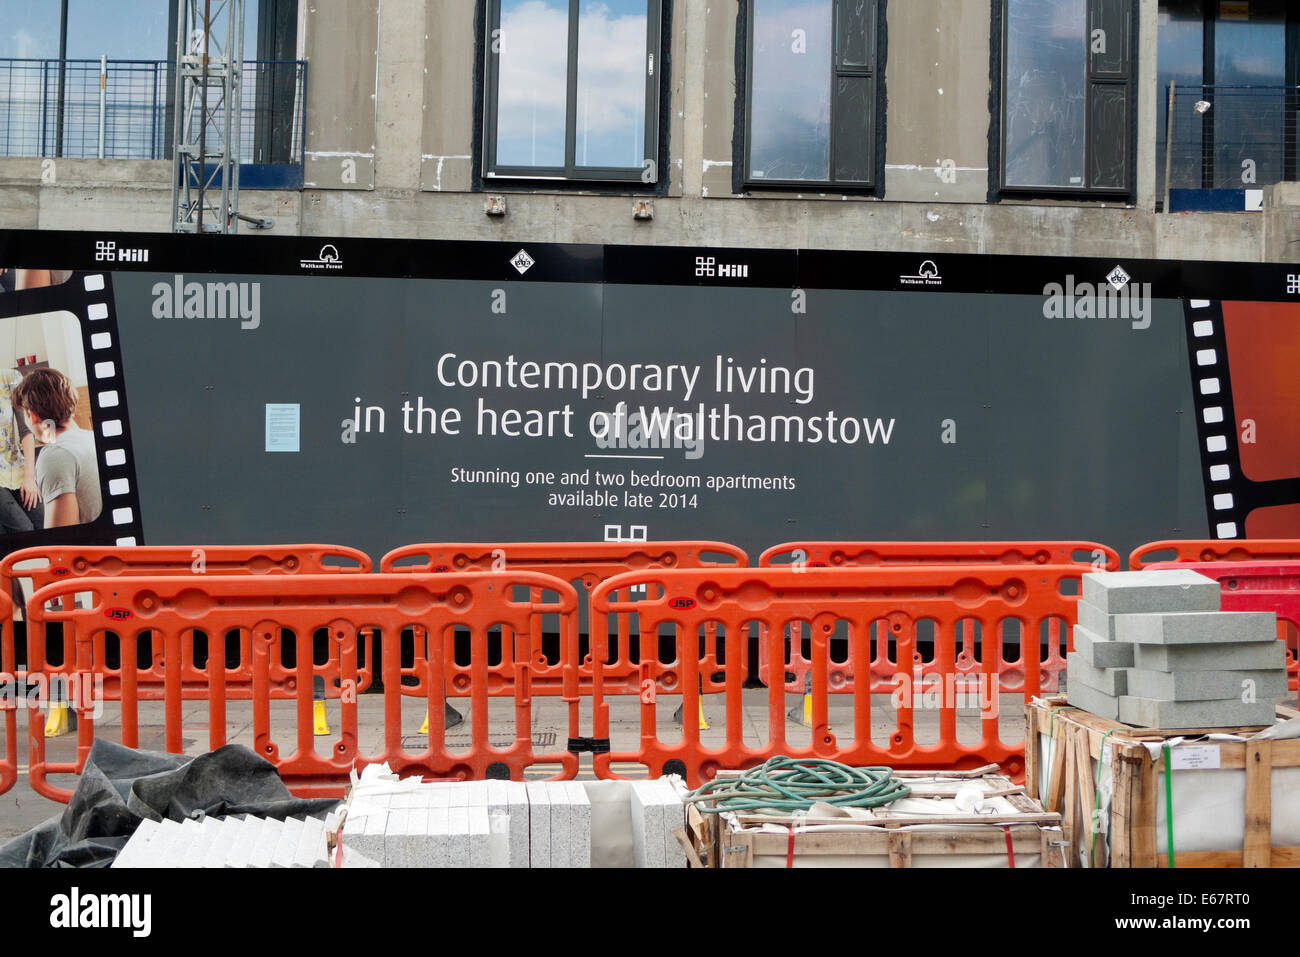 New flats under construction & roadworks at 'Cleveland Place' in Walthamstow London E17 UK  KATHY DEWITT Stock Photo